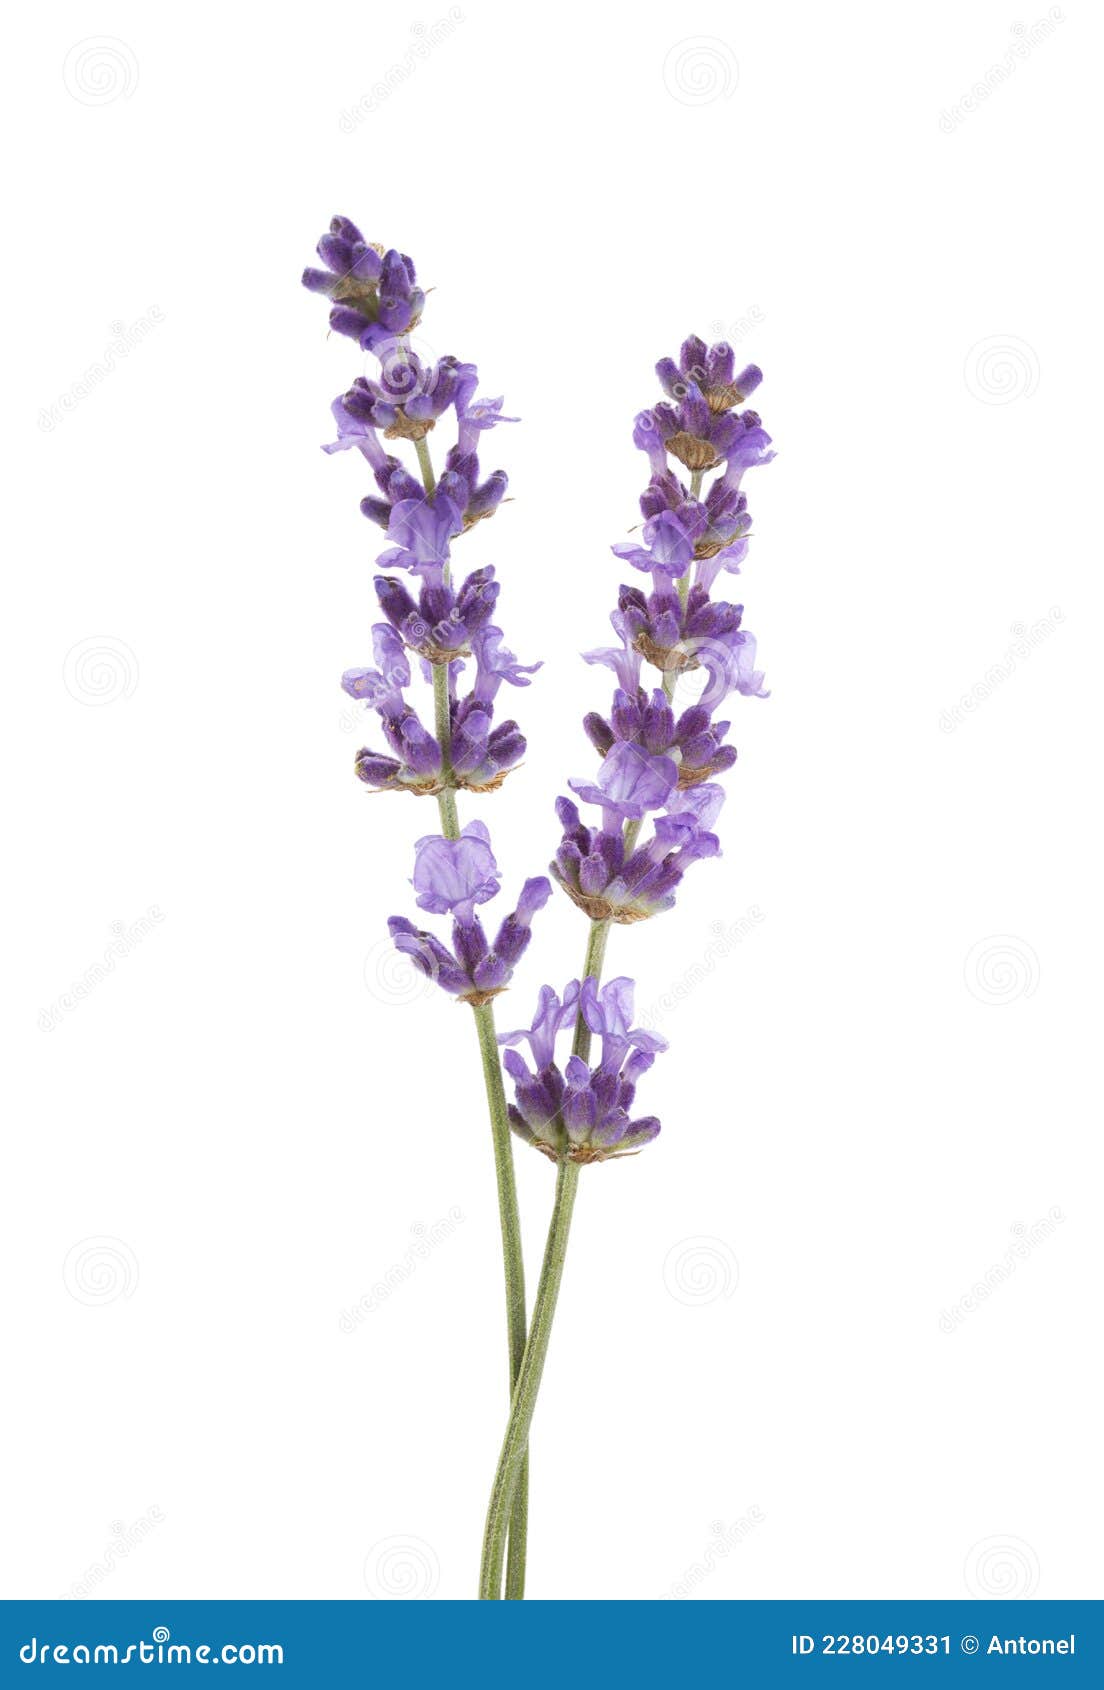 two sprigs  of lavender  on white background